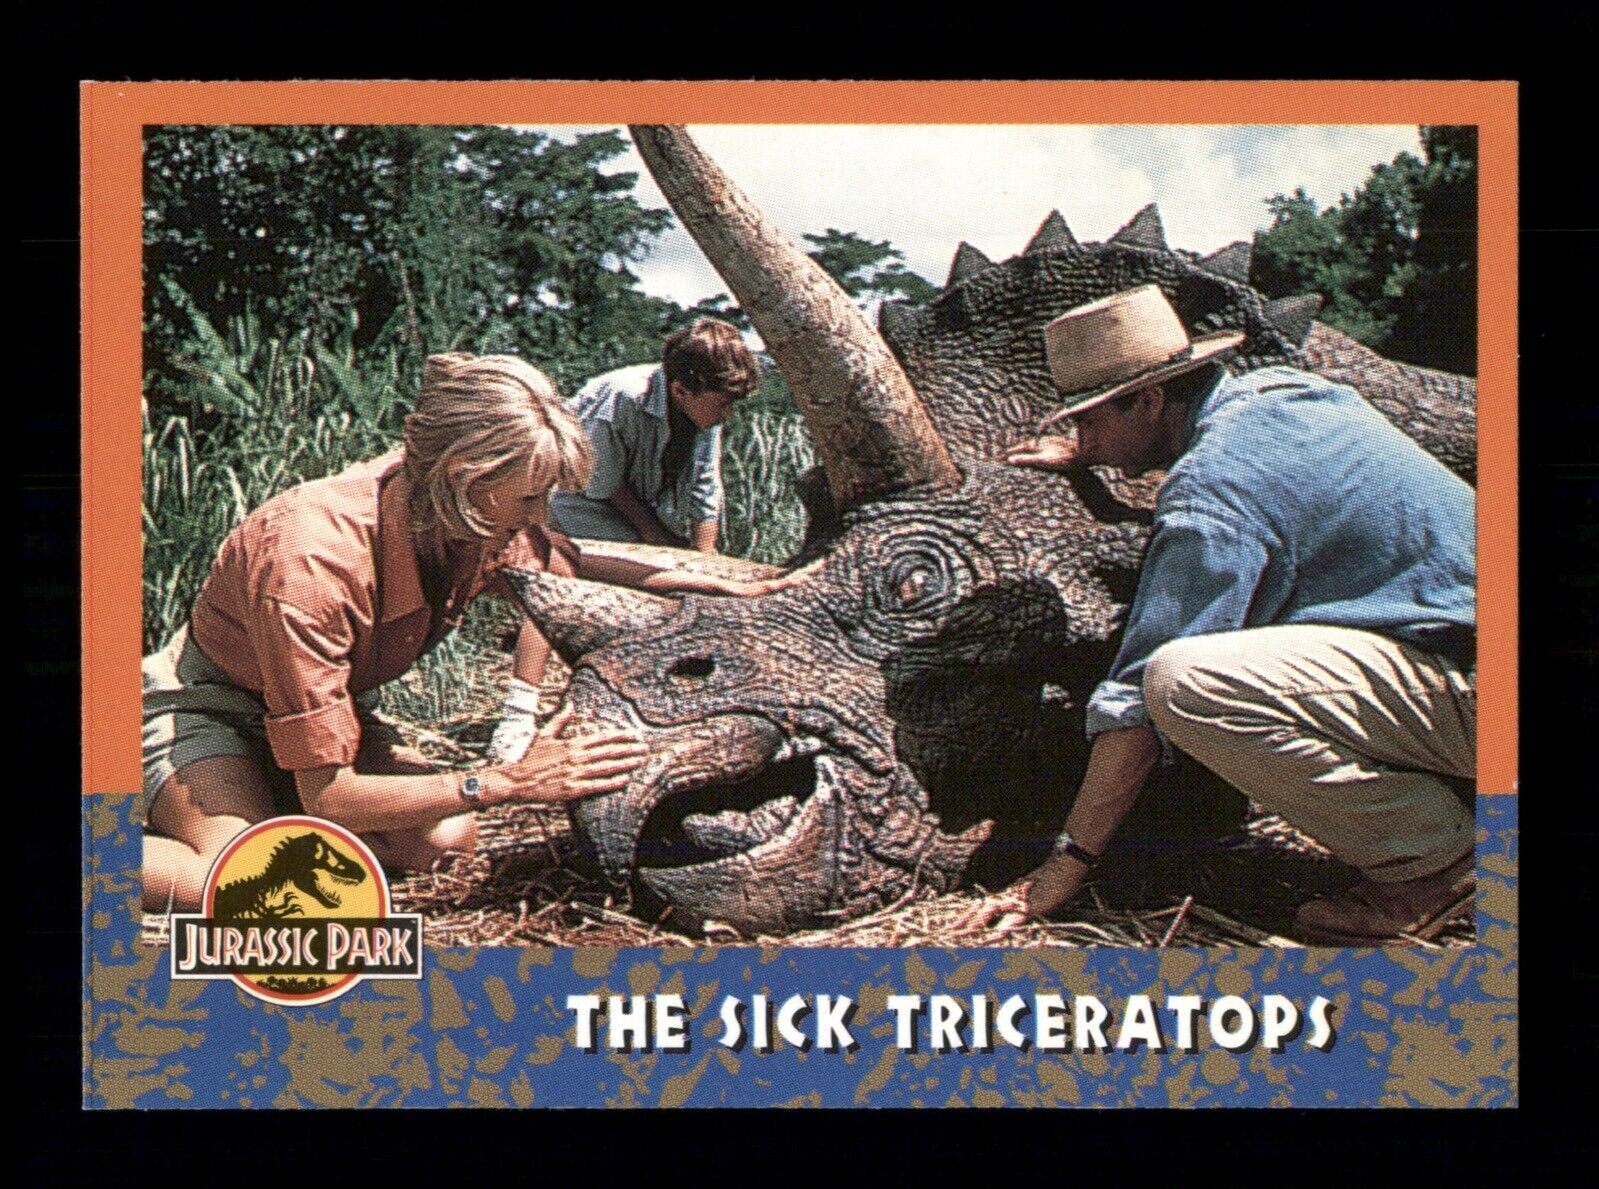 The Sick Triceratops 28 Topps Jurassic Park 1993 Trading Card TCG CCG